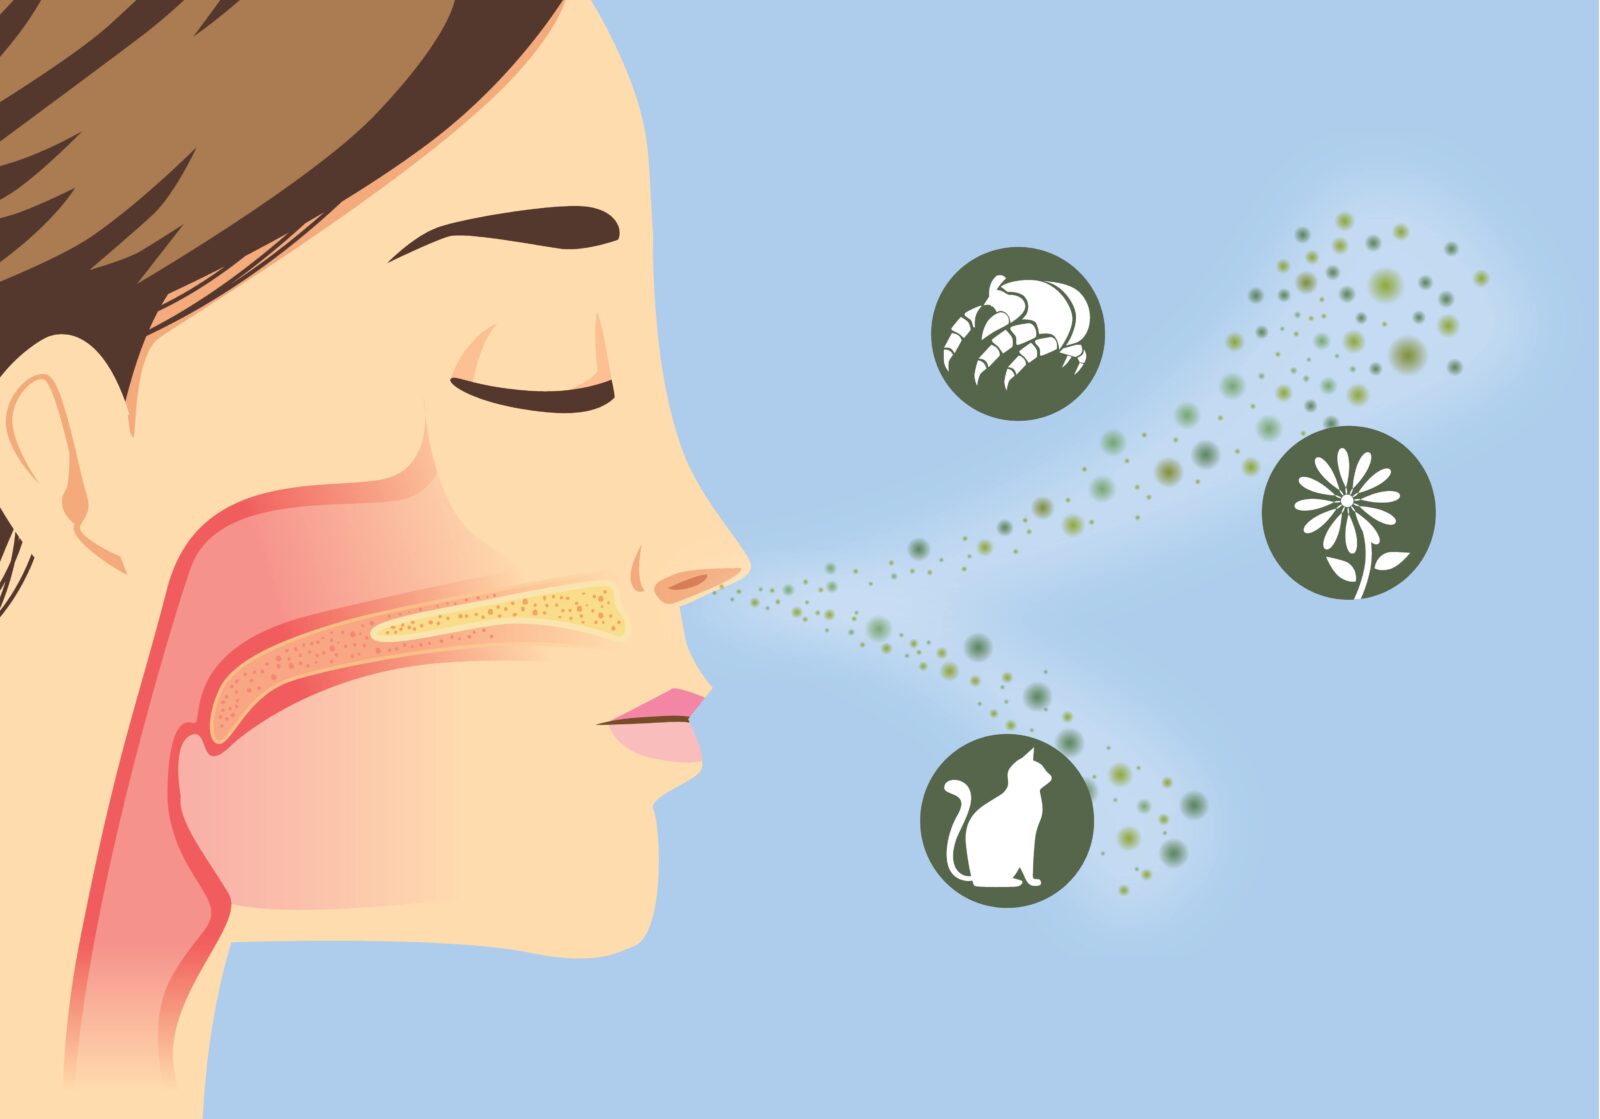 computerized image of woman's side profile inhaling different allergens: pet dander, dust mites, pollen